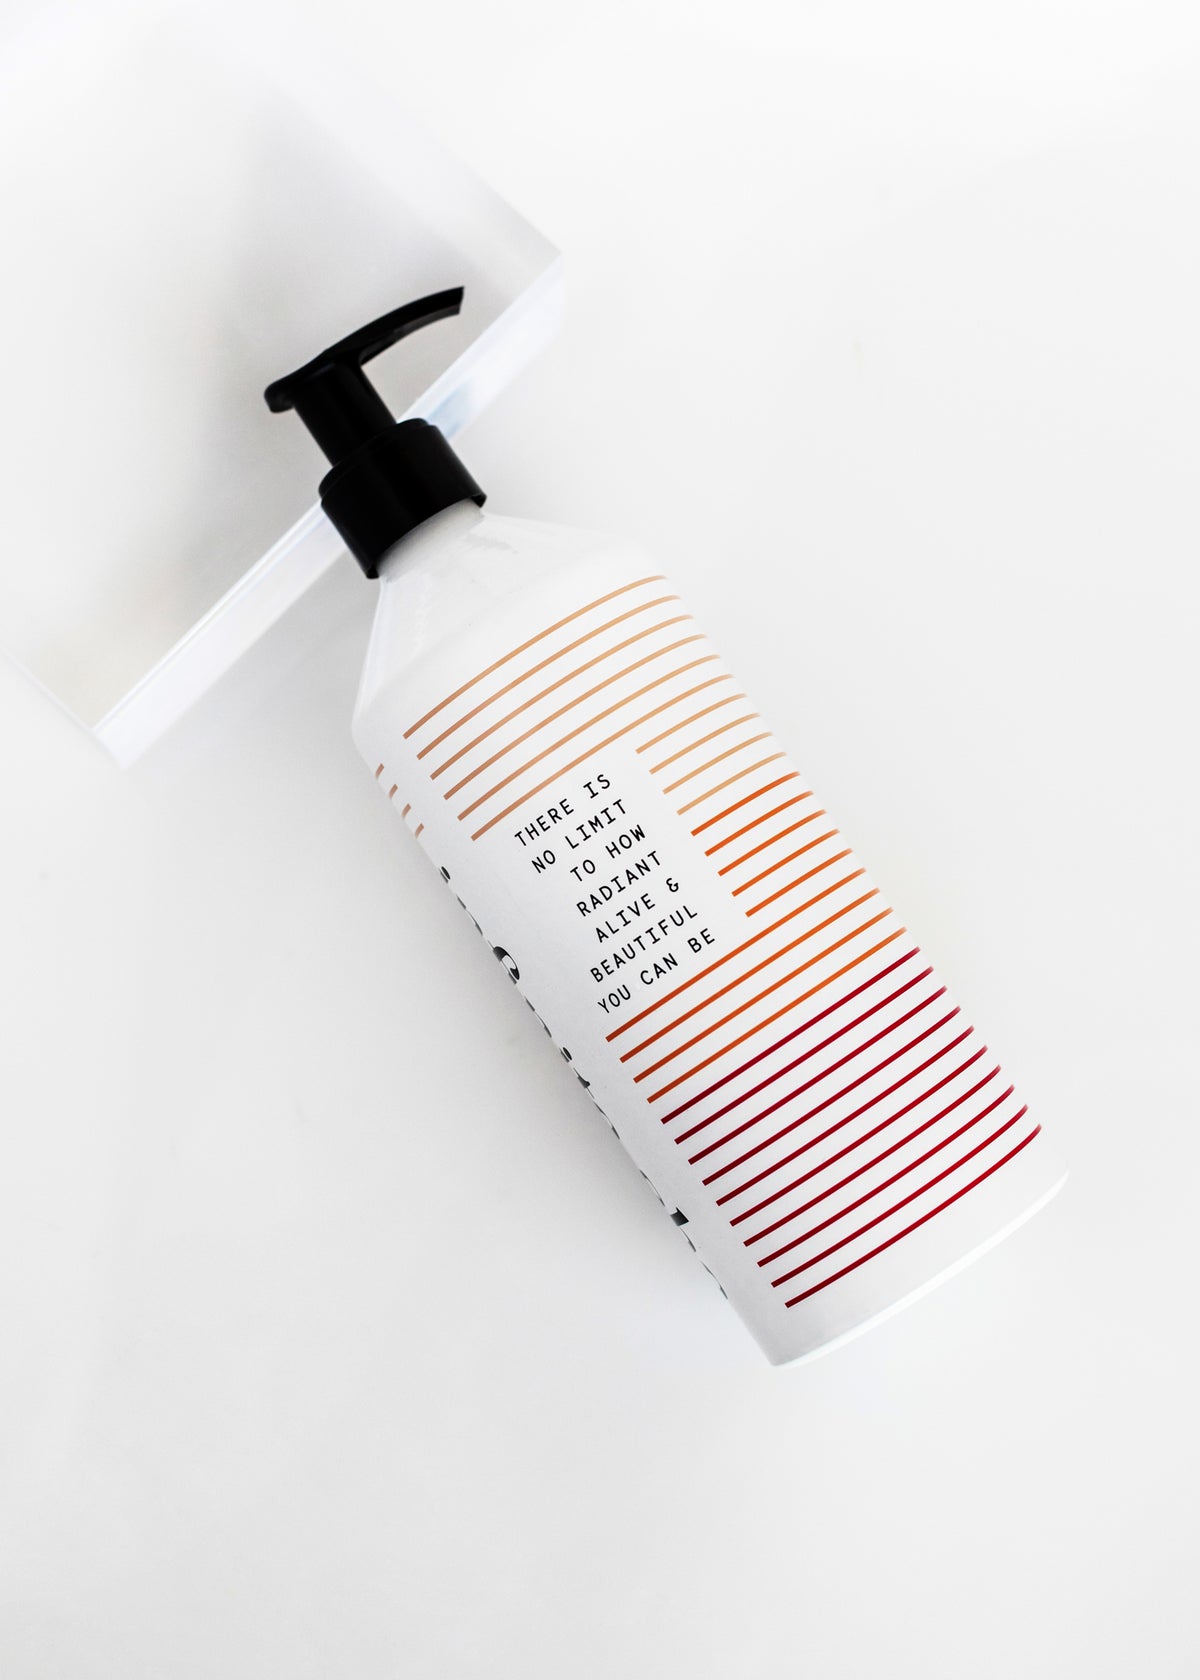 A white Infinite She Vibrant Hydrating Body Lotion bottle with a black pump, lying on a white surface. The bottle features orange diagonal stripes and text that reads, "there is no limit to how radiant, alive, and irresistible you" by Margot Elena.